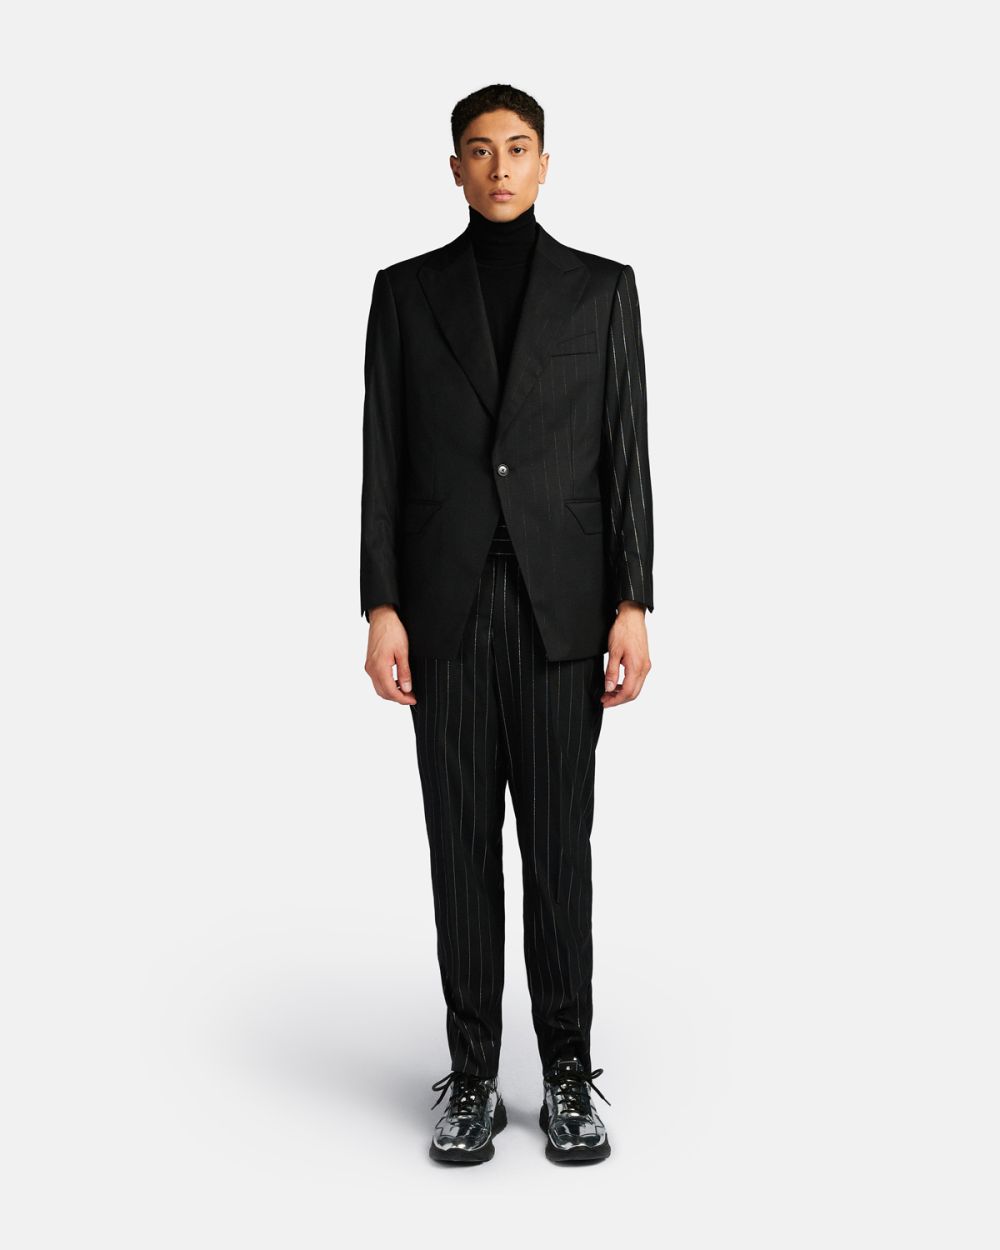 Single Breasted Event Black Diplomatic Suit